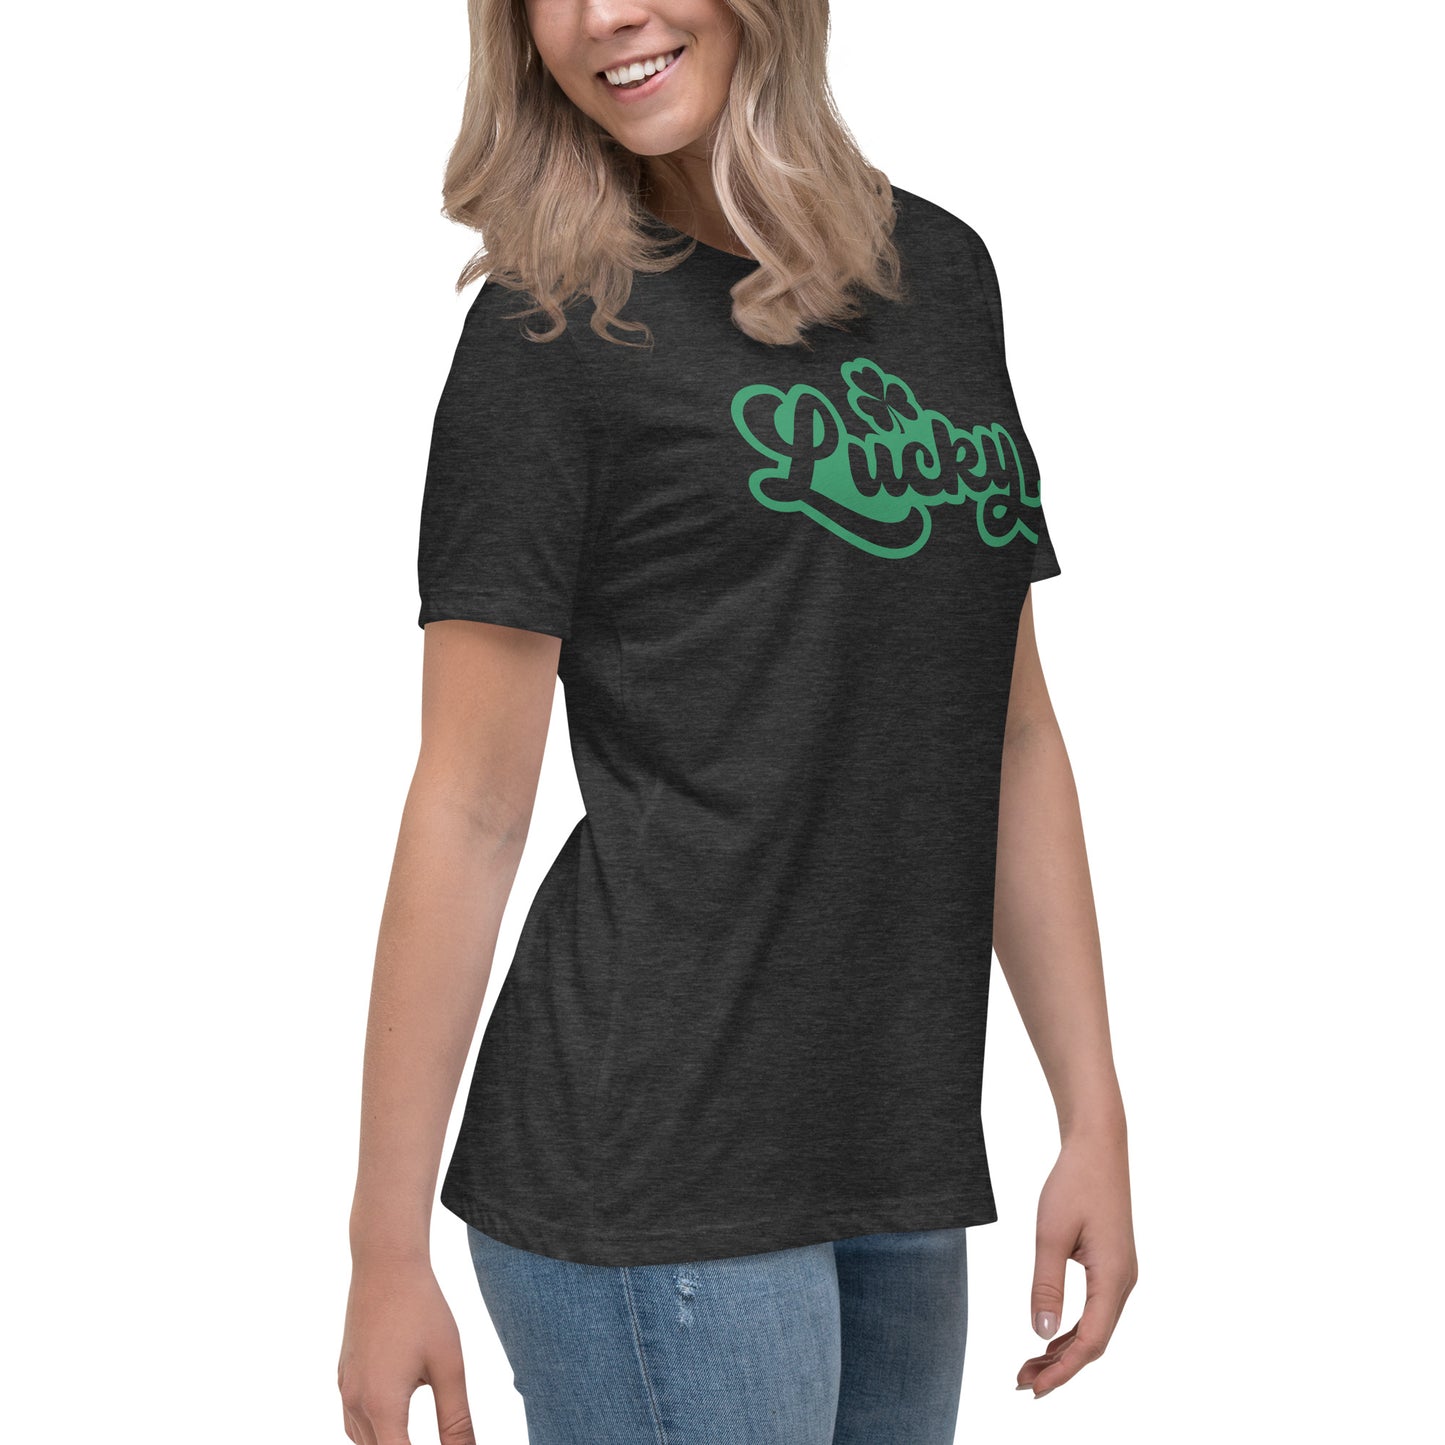 Women's Relaxed T-Shirt - St Patty's Day Lucky